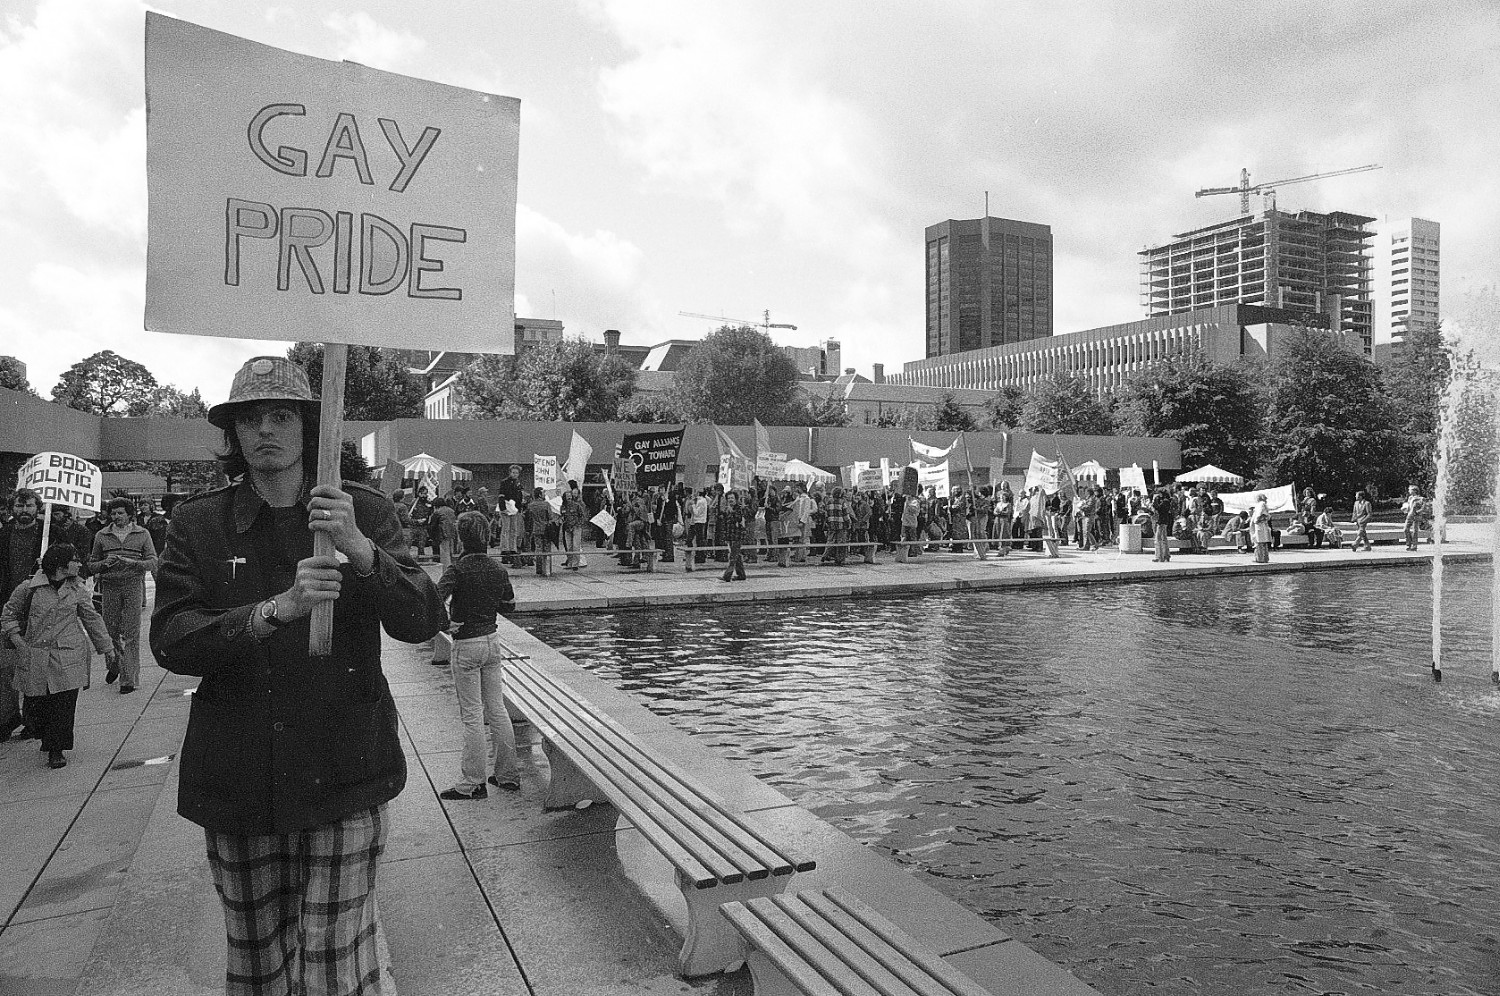 Black and white photo of man with sign.